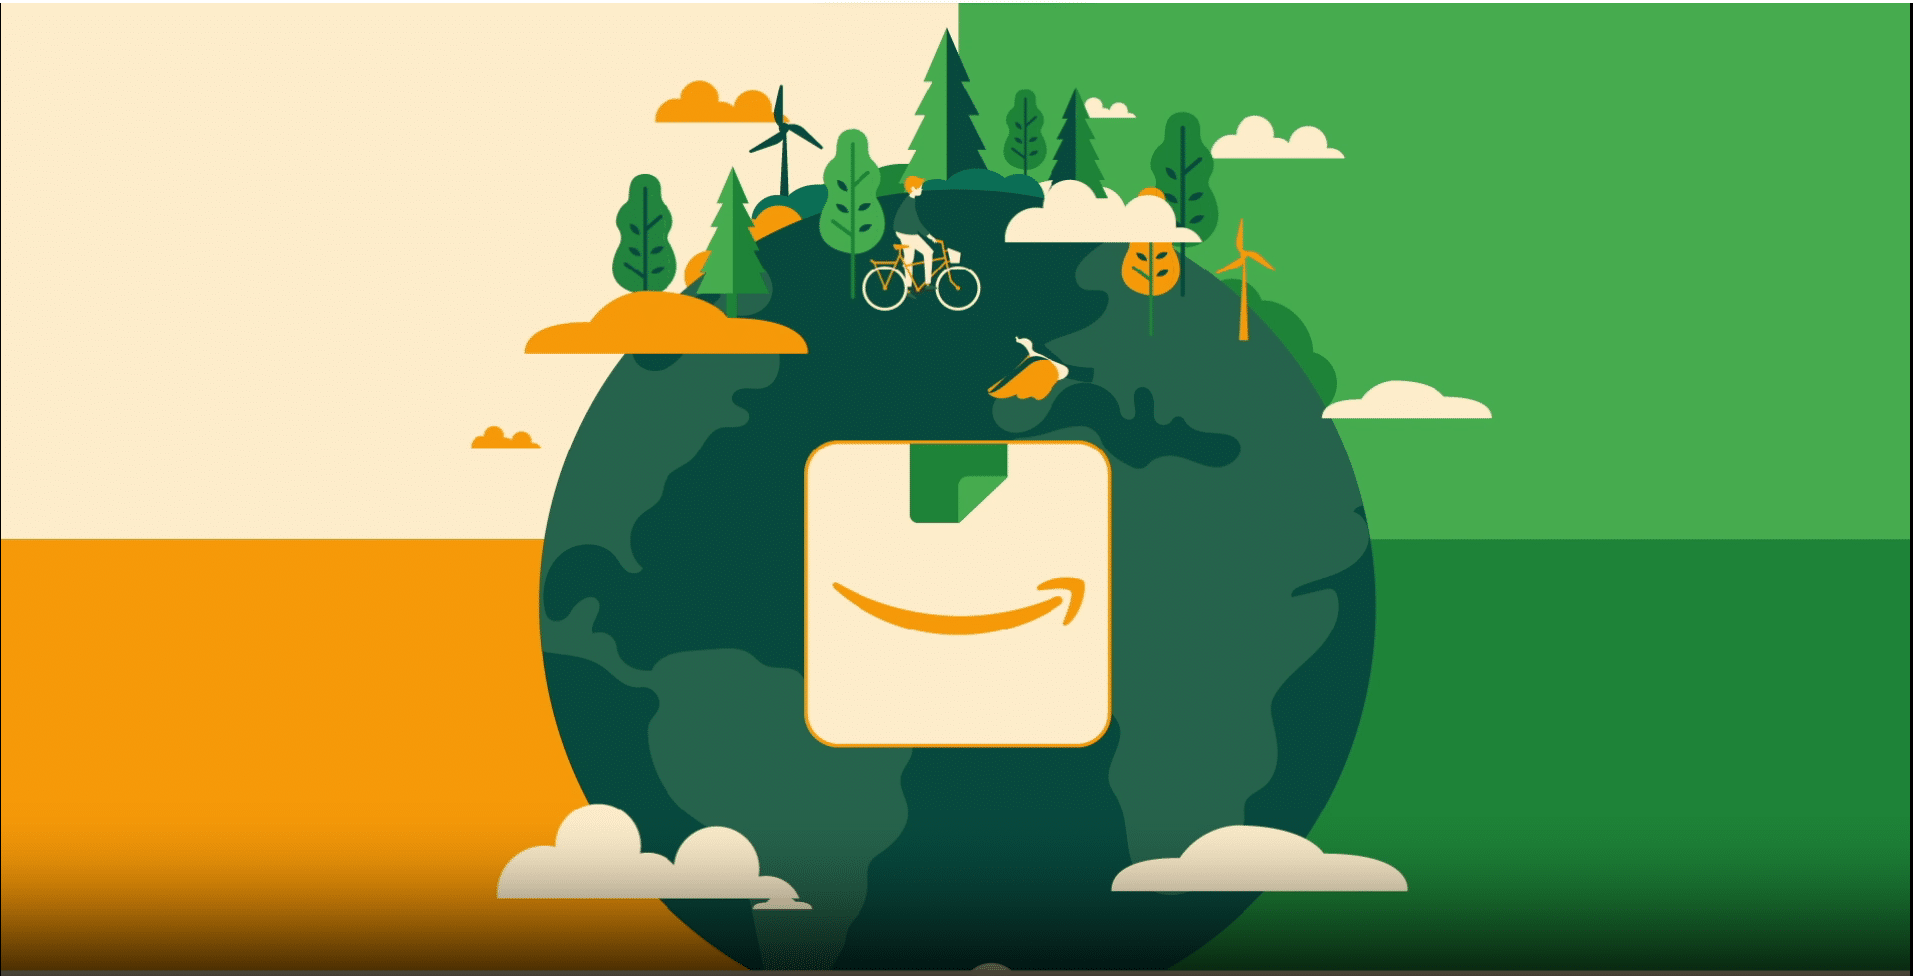 Photo of the world with Amazon logo on the middle